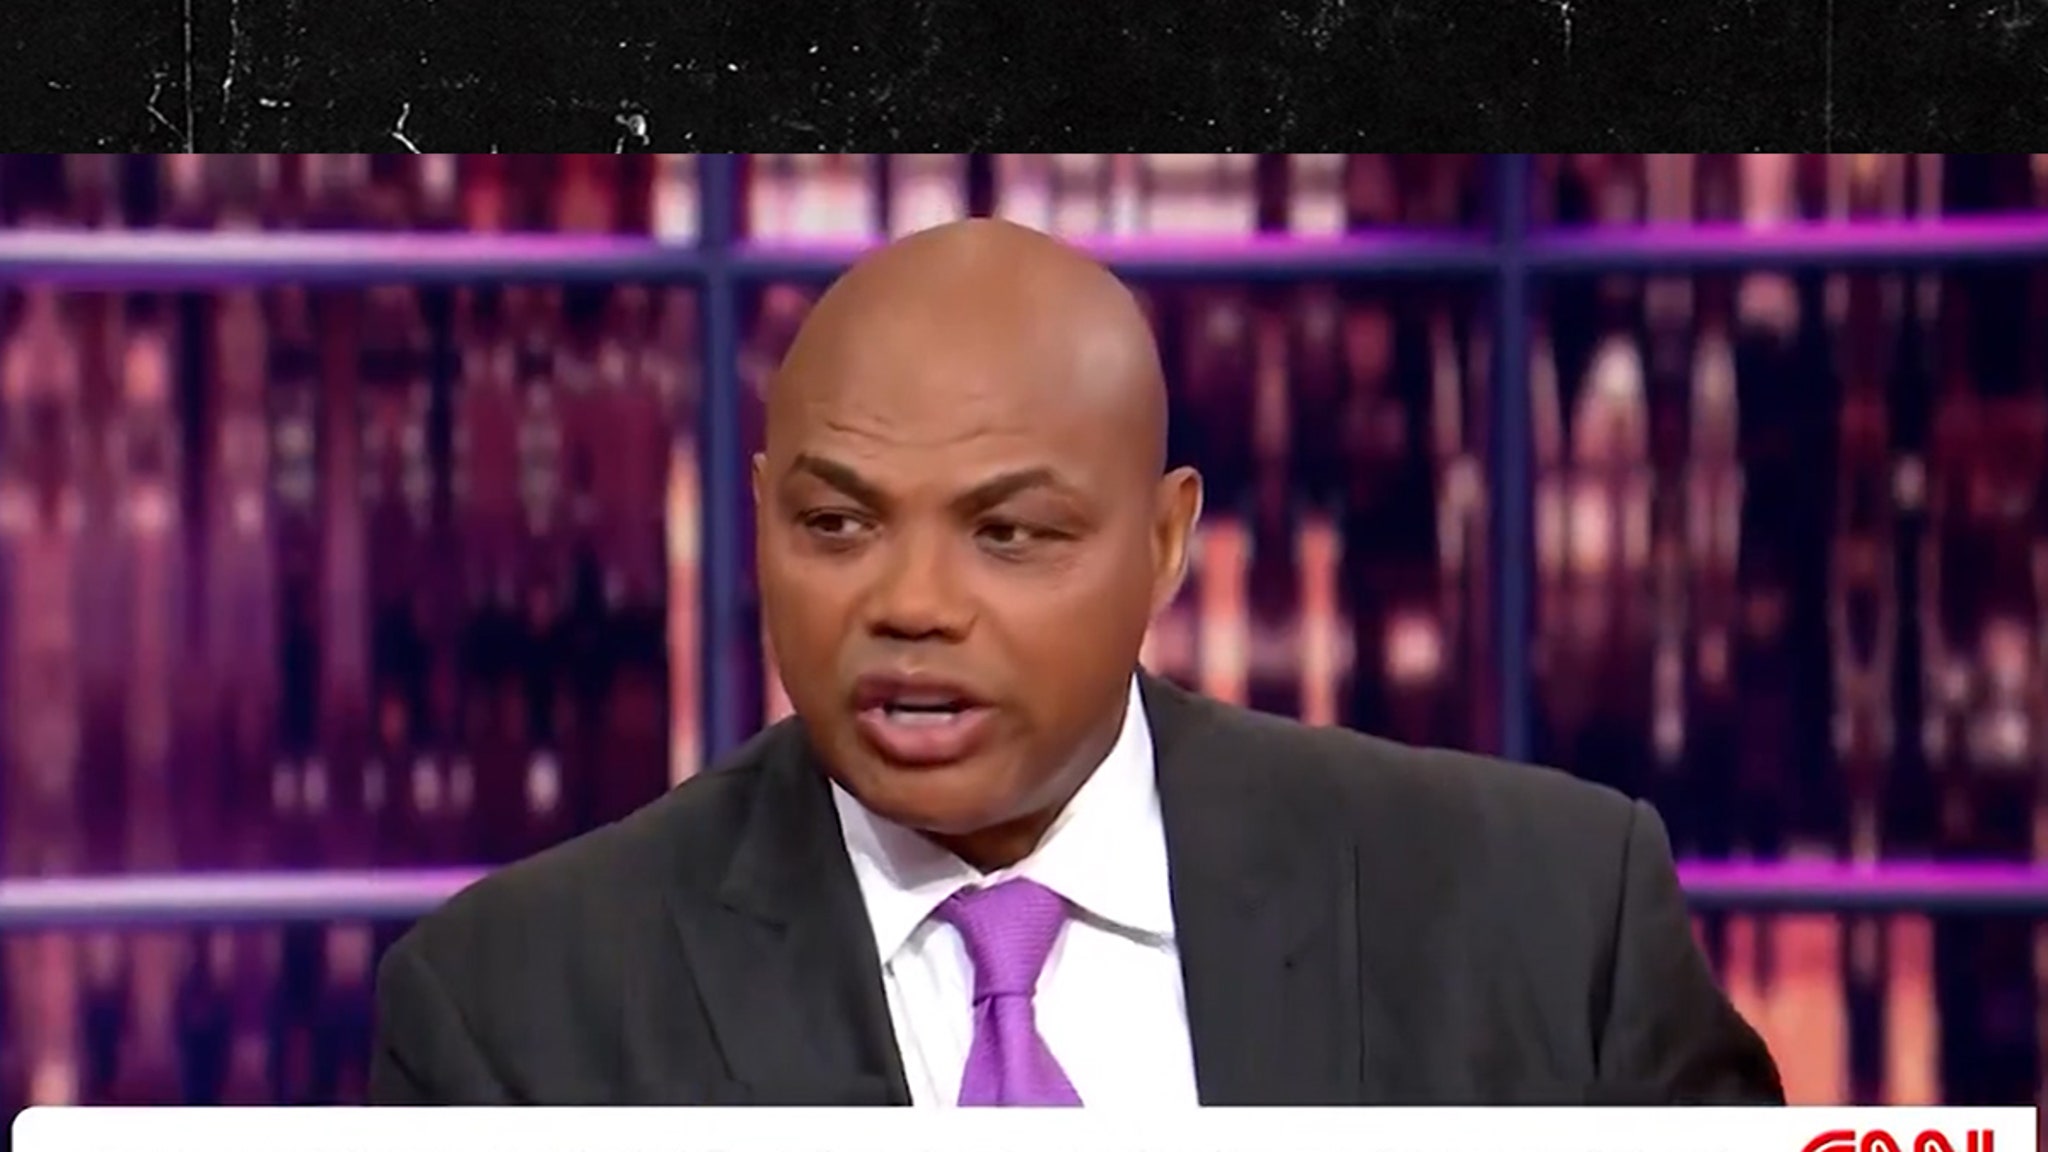 NBA Hall of Famer Charles Barkley vows to punch any Black person wearing Trump